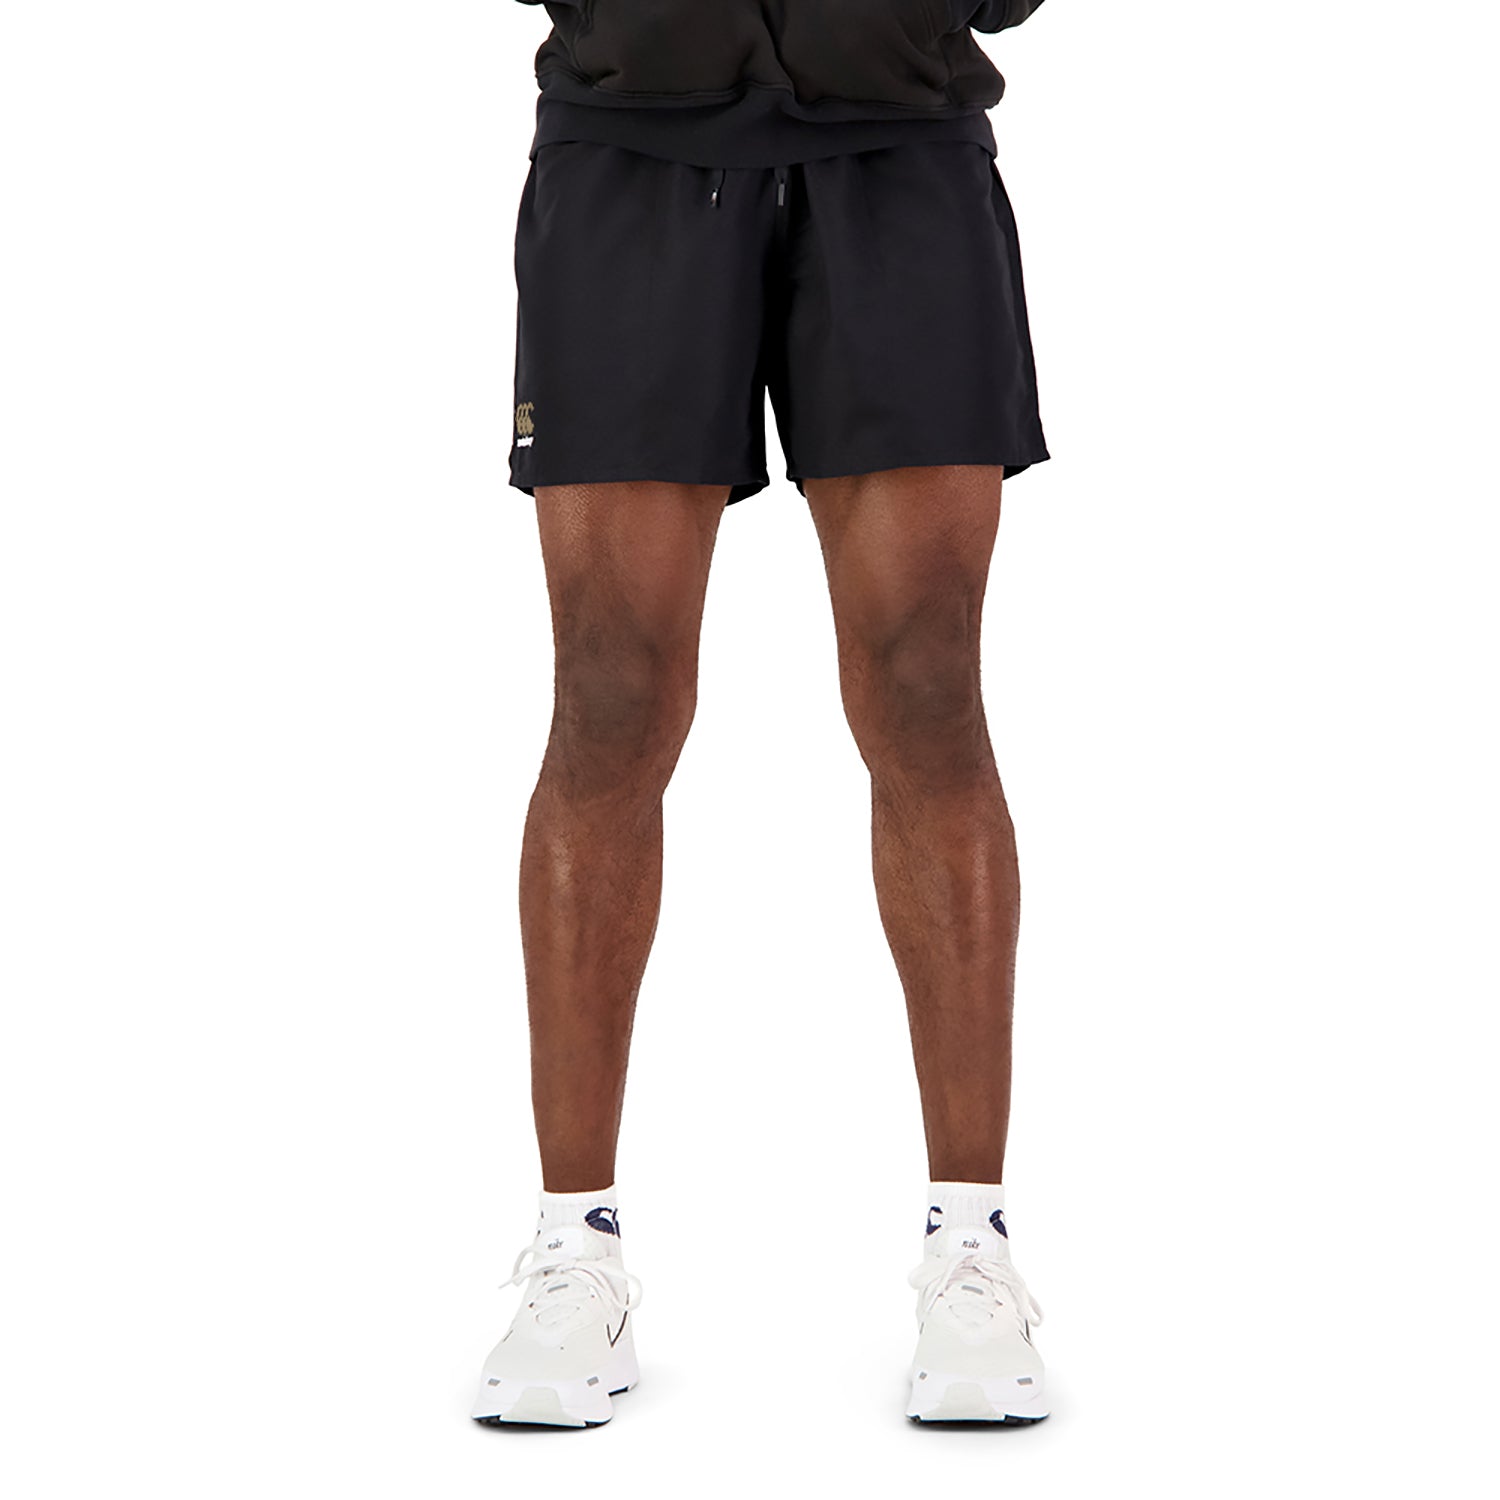 Anchor Tactic Short H2 22 - The Rugby Shop Darwin